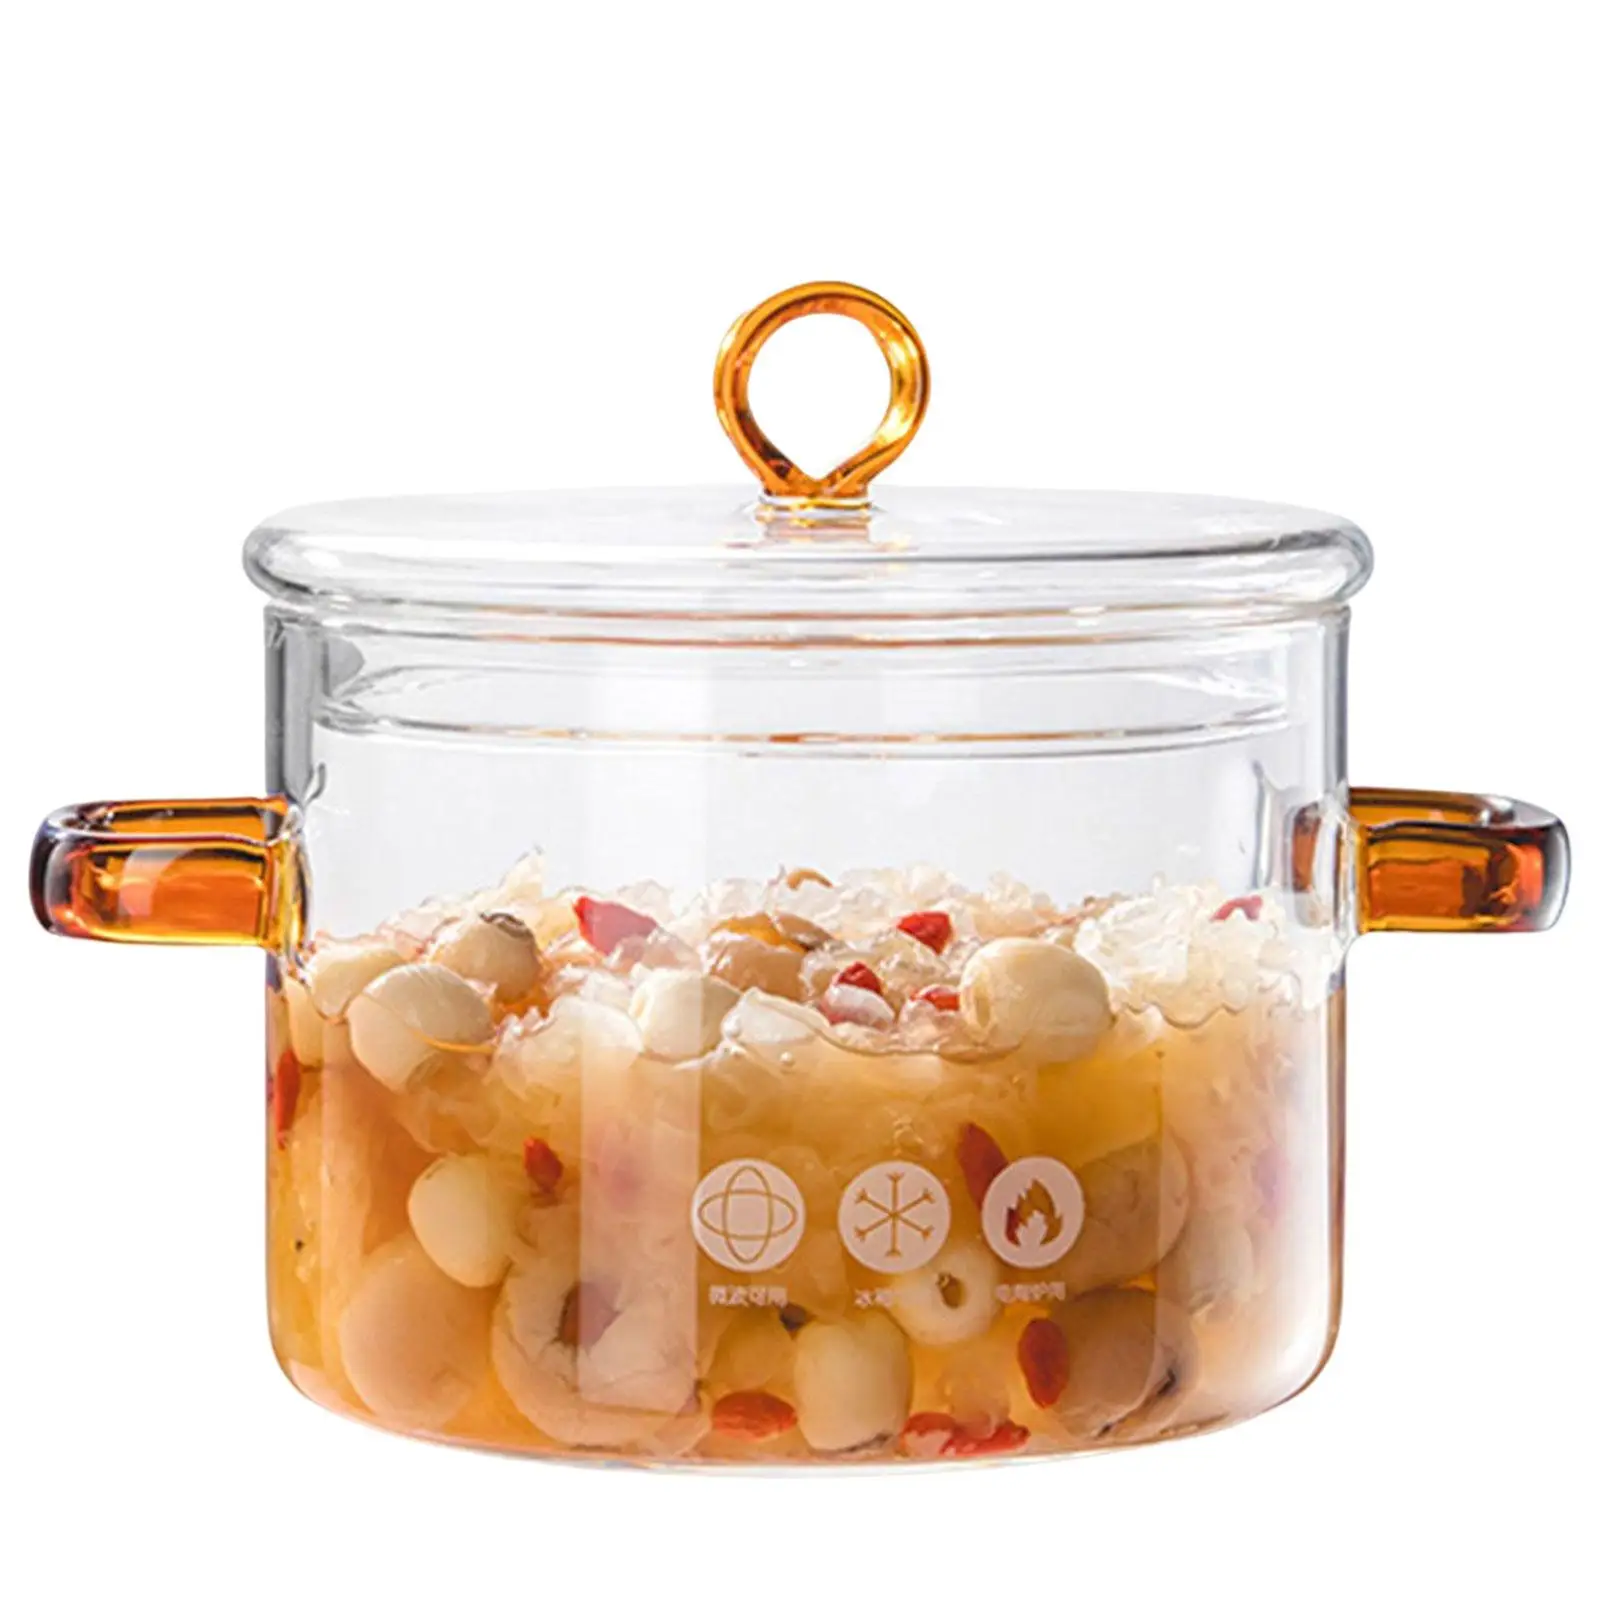 Heat Resistant Transparent Stew Pot Saucepan with Cover Cookware with Lid and Handle Glass Cooking Pot for Food Tea Noodles Soup